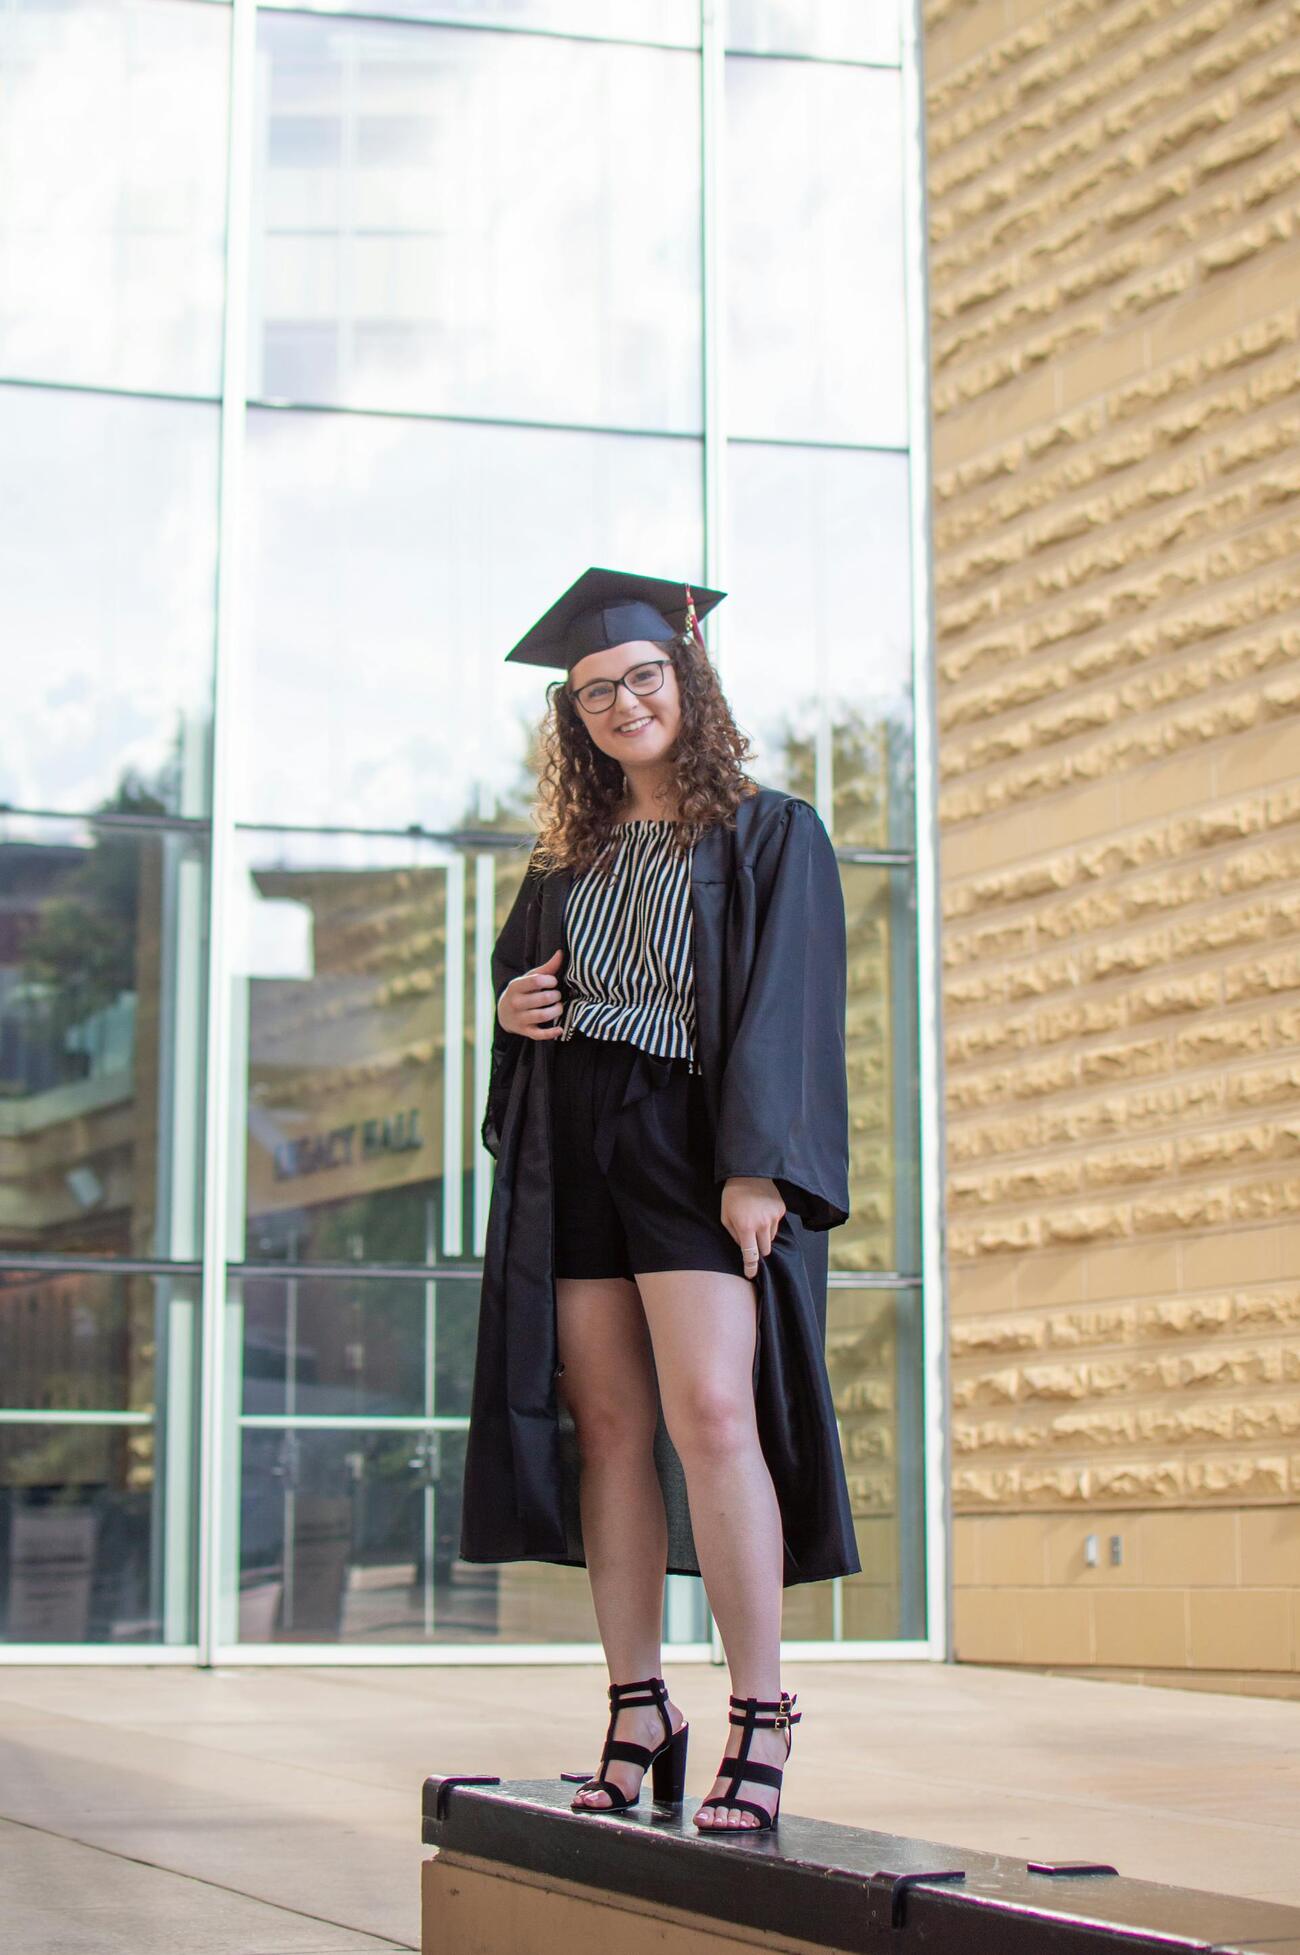 A woman in a graduation gown standing on a ledge